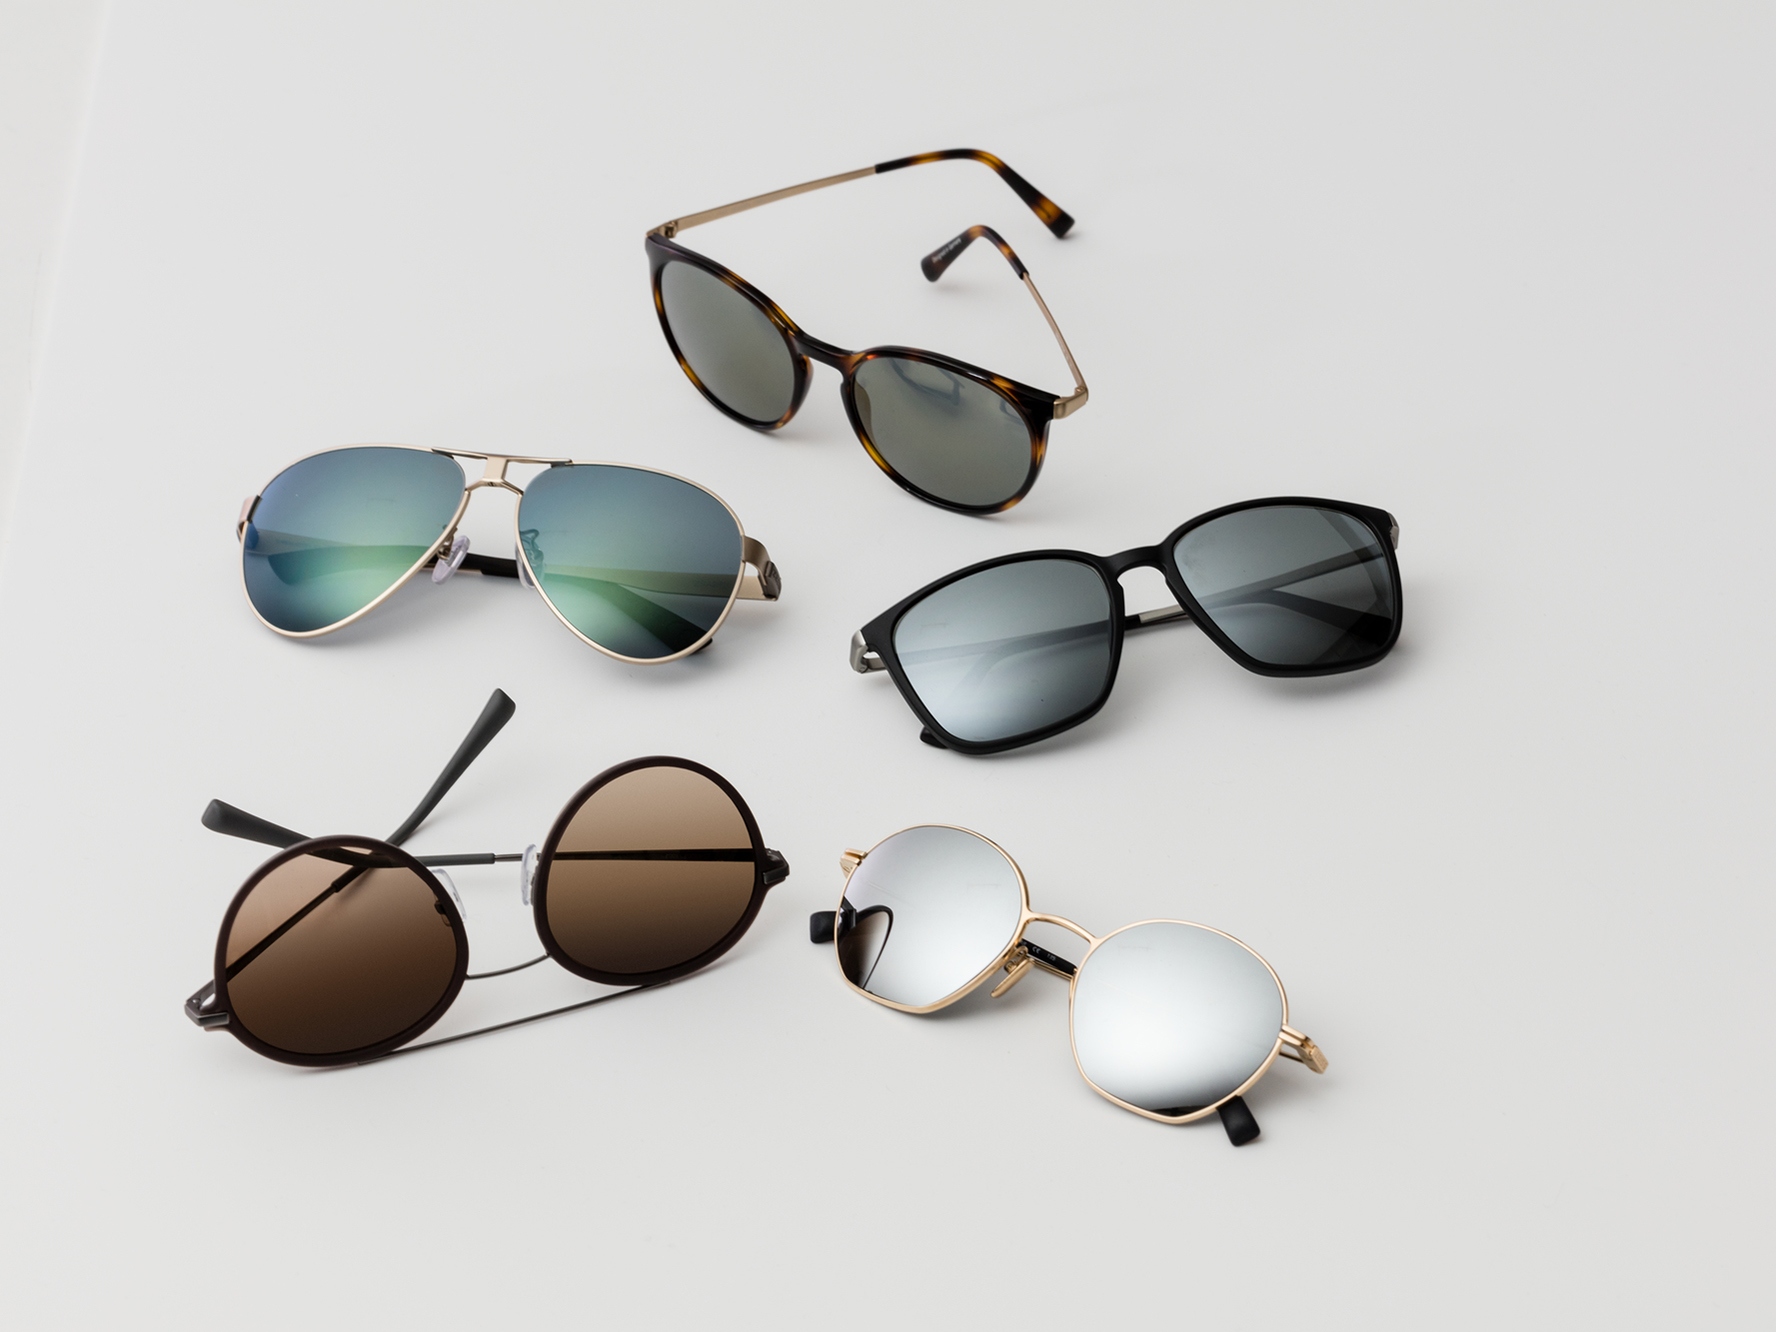 Five pairs of sunglasses, showing the classical sun protection tints for medium to bright light conditions.